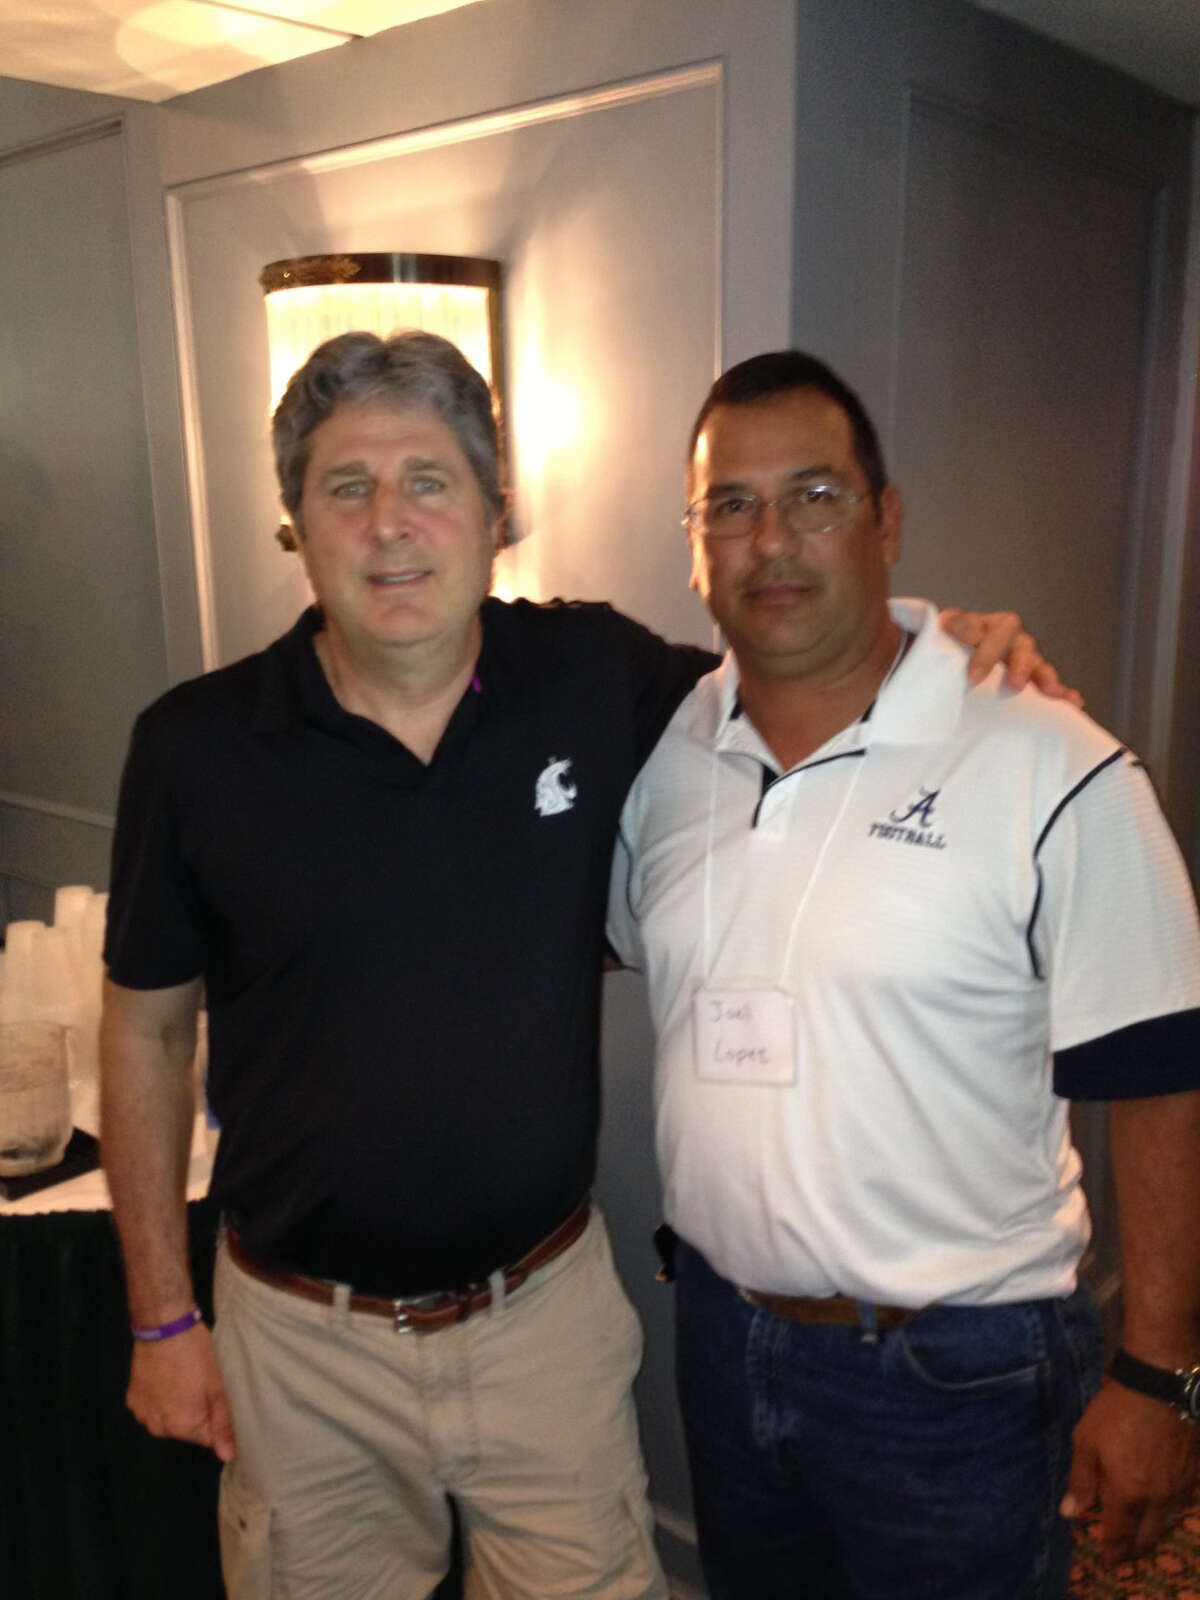 Zapata head coach Joel Lopez with legendary college football coach Mike Leach at a coaching clinic.